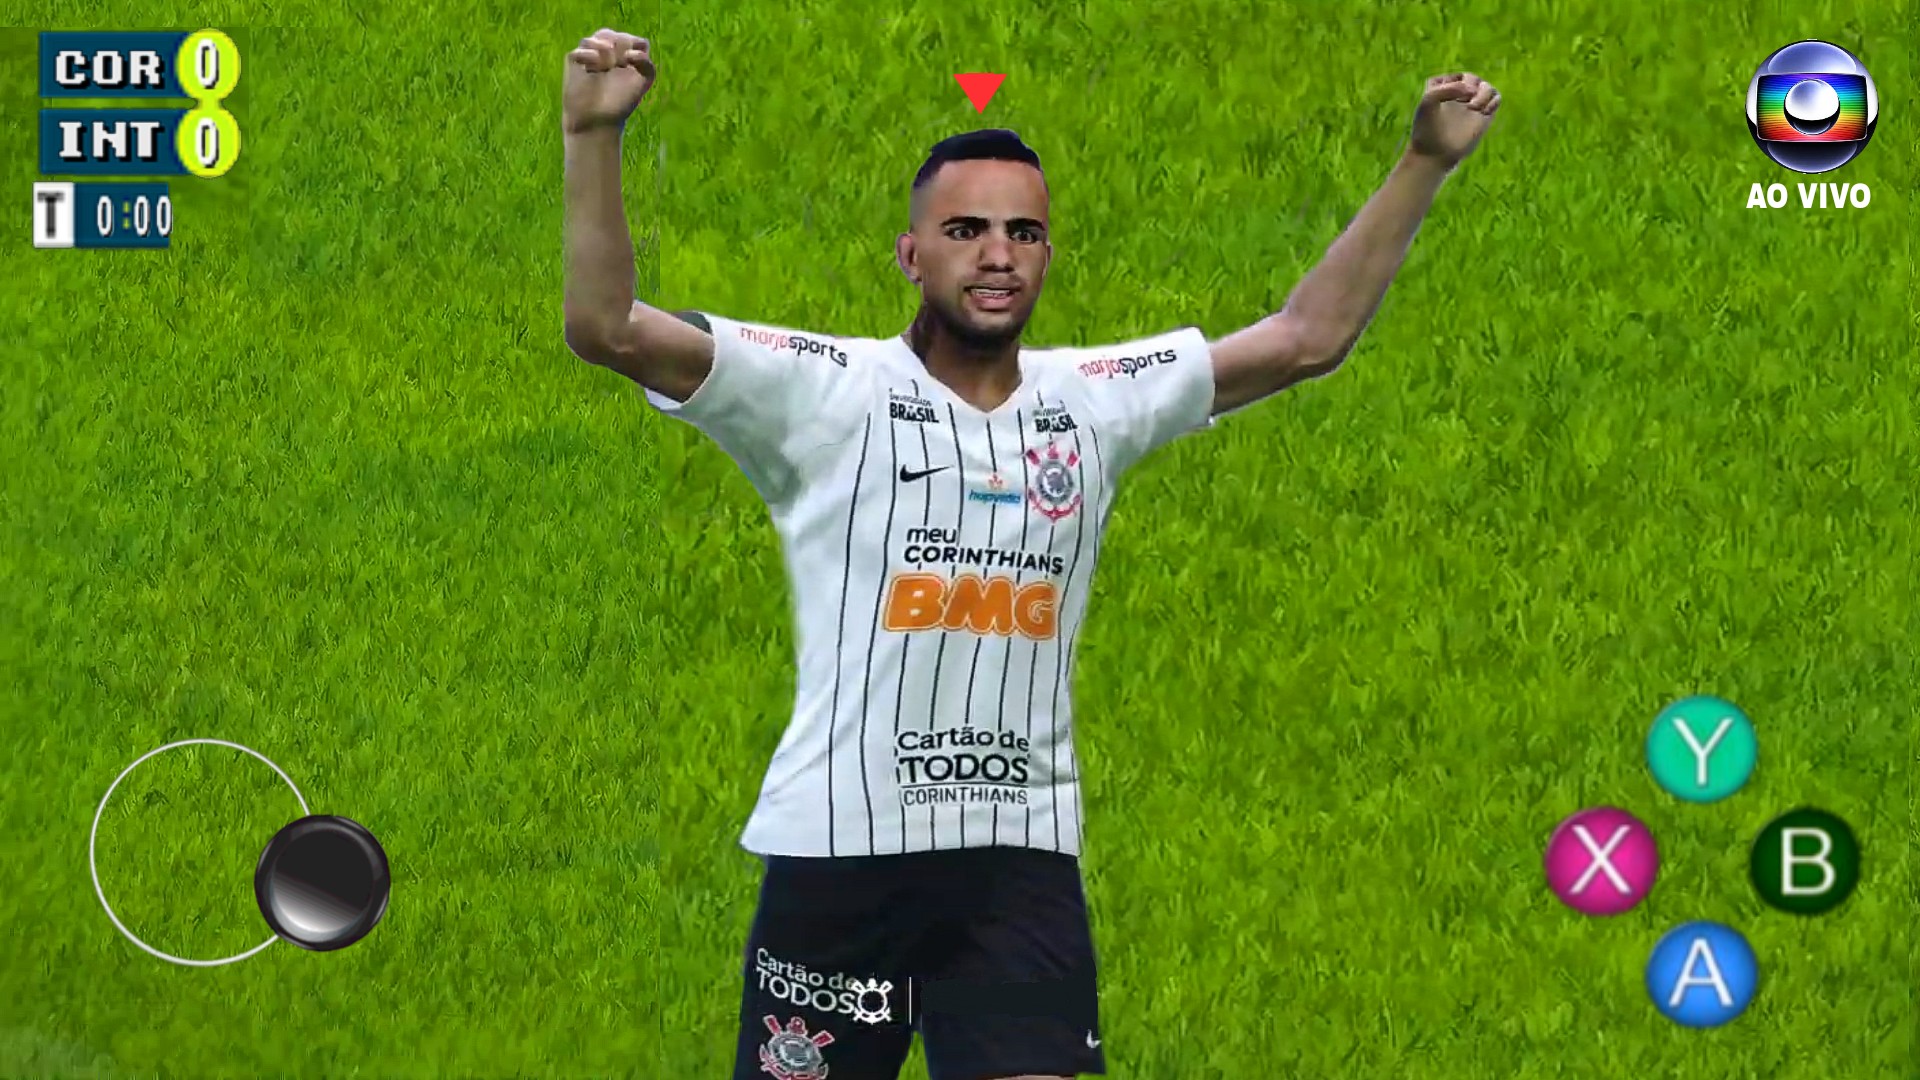 bvb in pes 2020 mobile